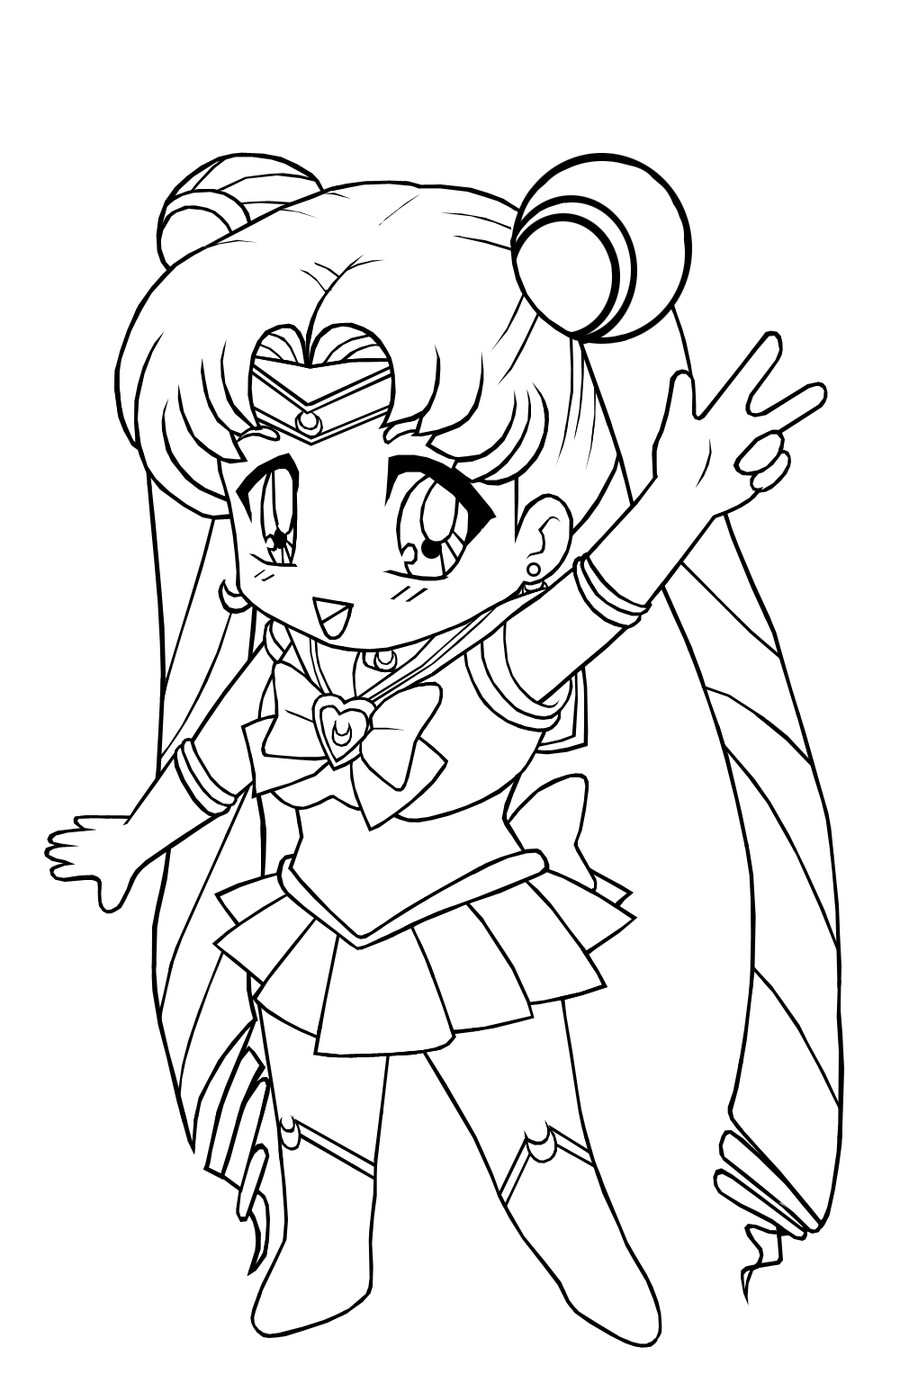 Anime Girl Coloring Pages To Print
 Kids Anime Girl Coloring Pages To Print